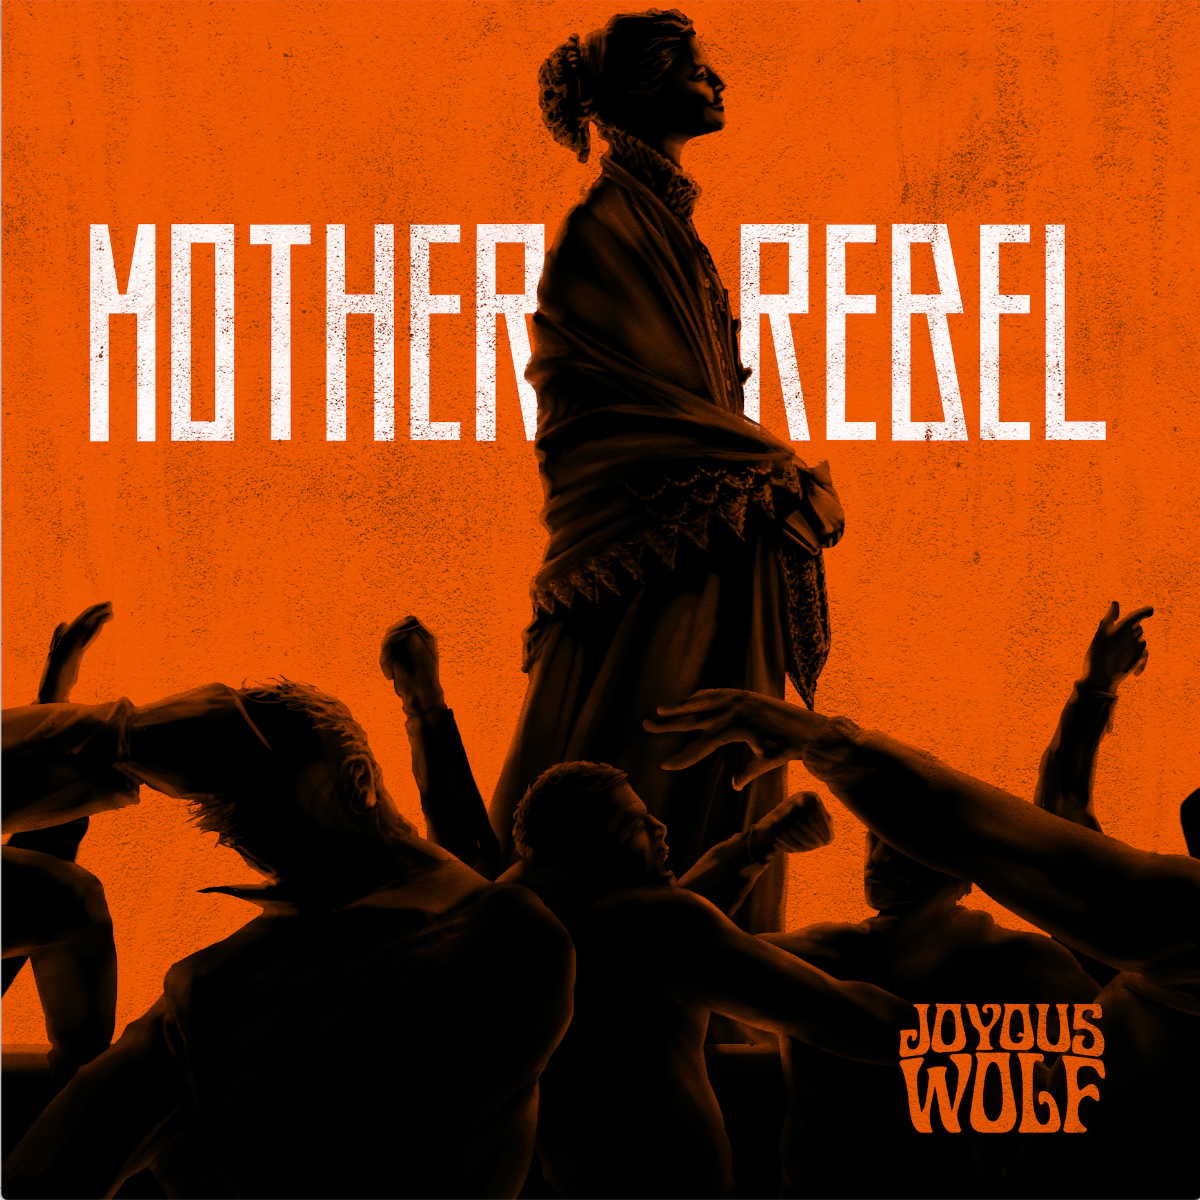 Joyous Wolf Release "Mother Rebel" EP + Watch Live Video For The Title Track